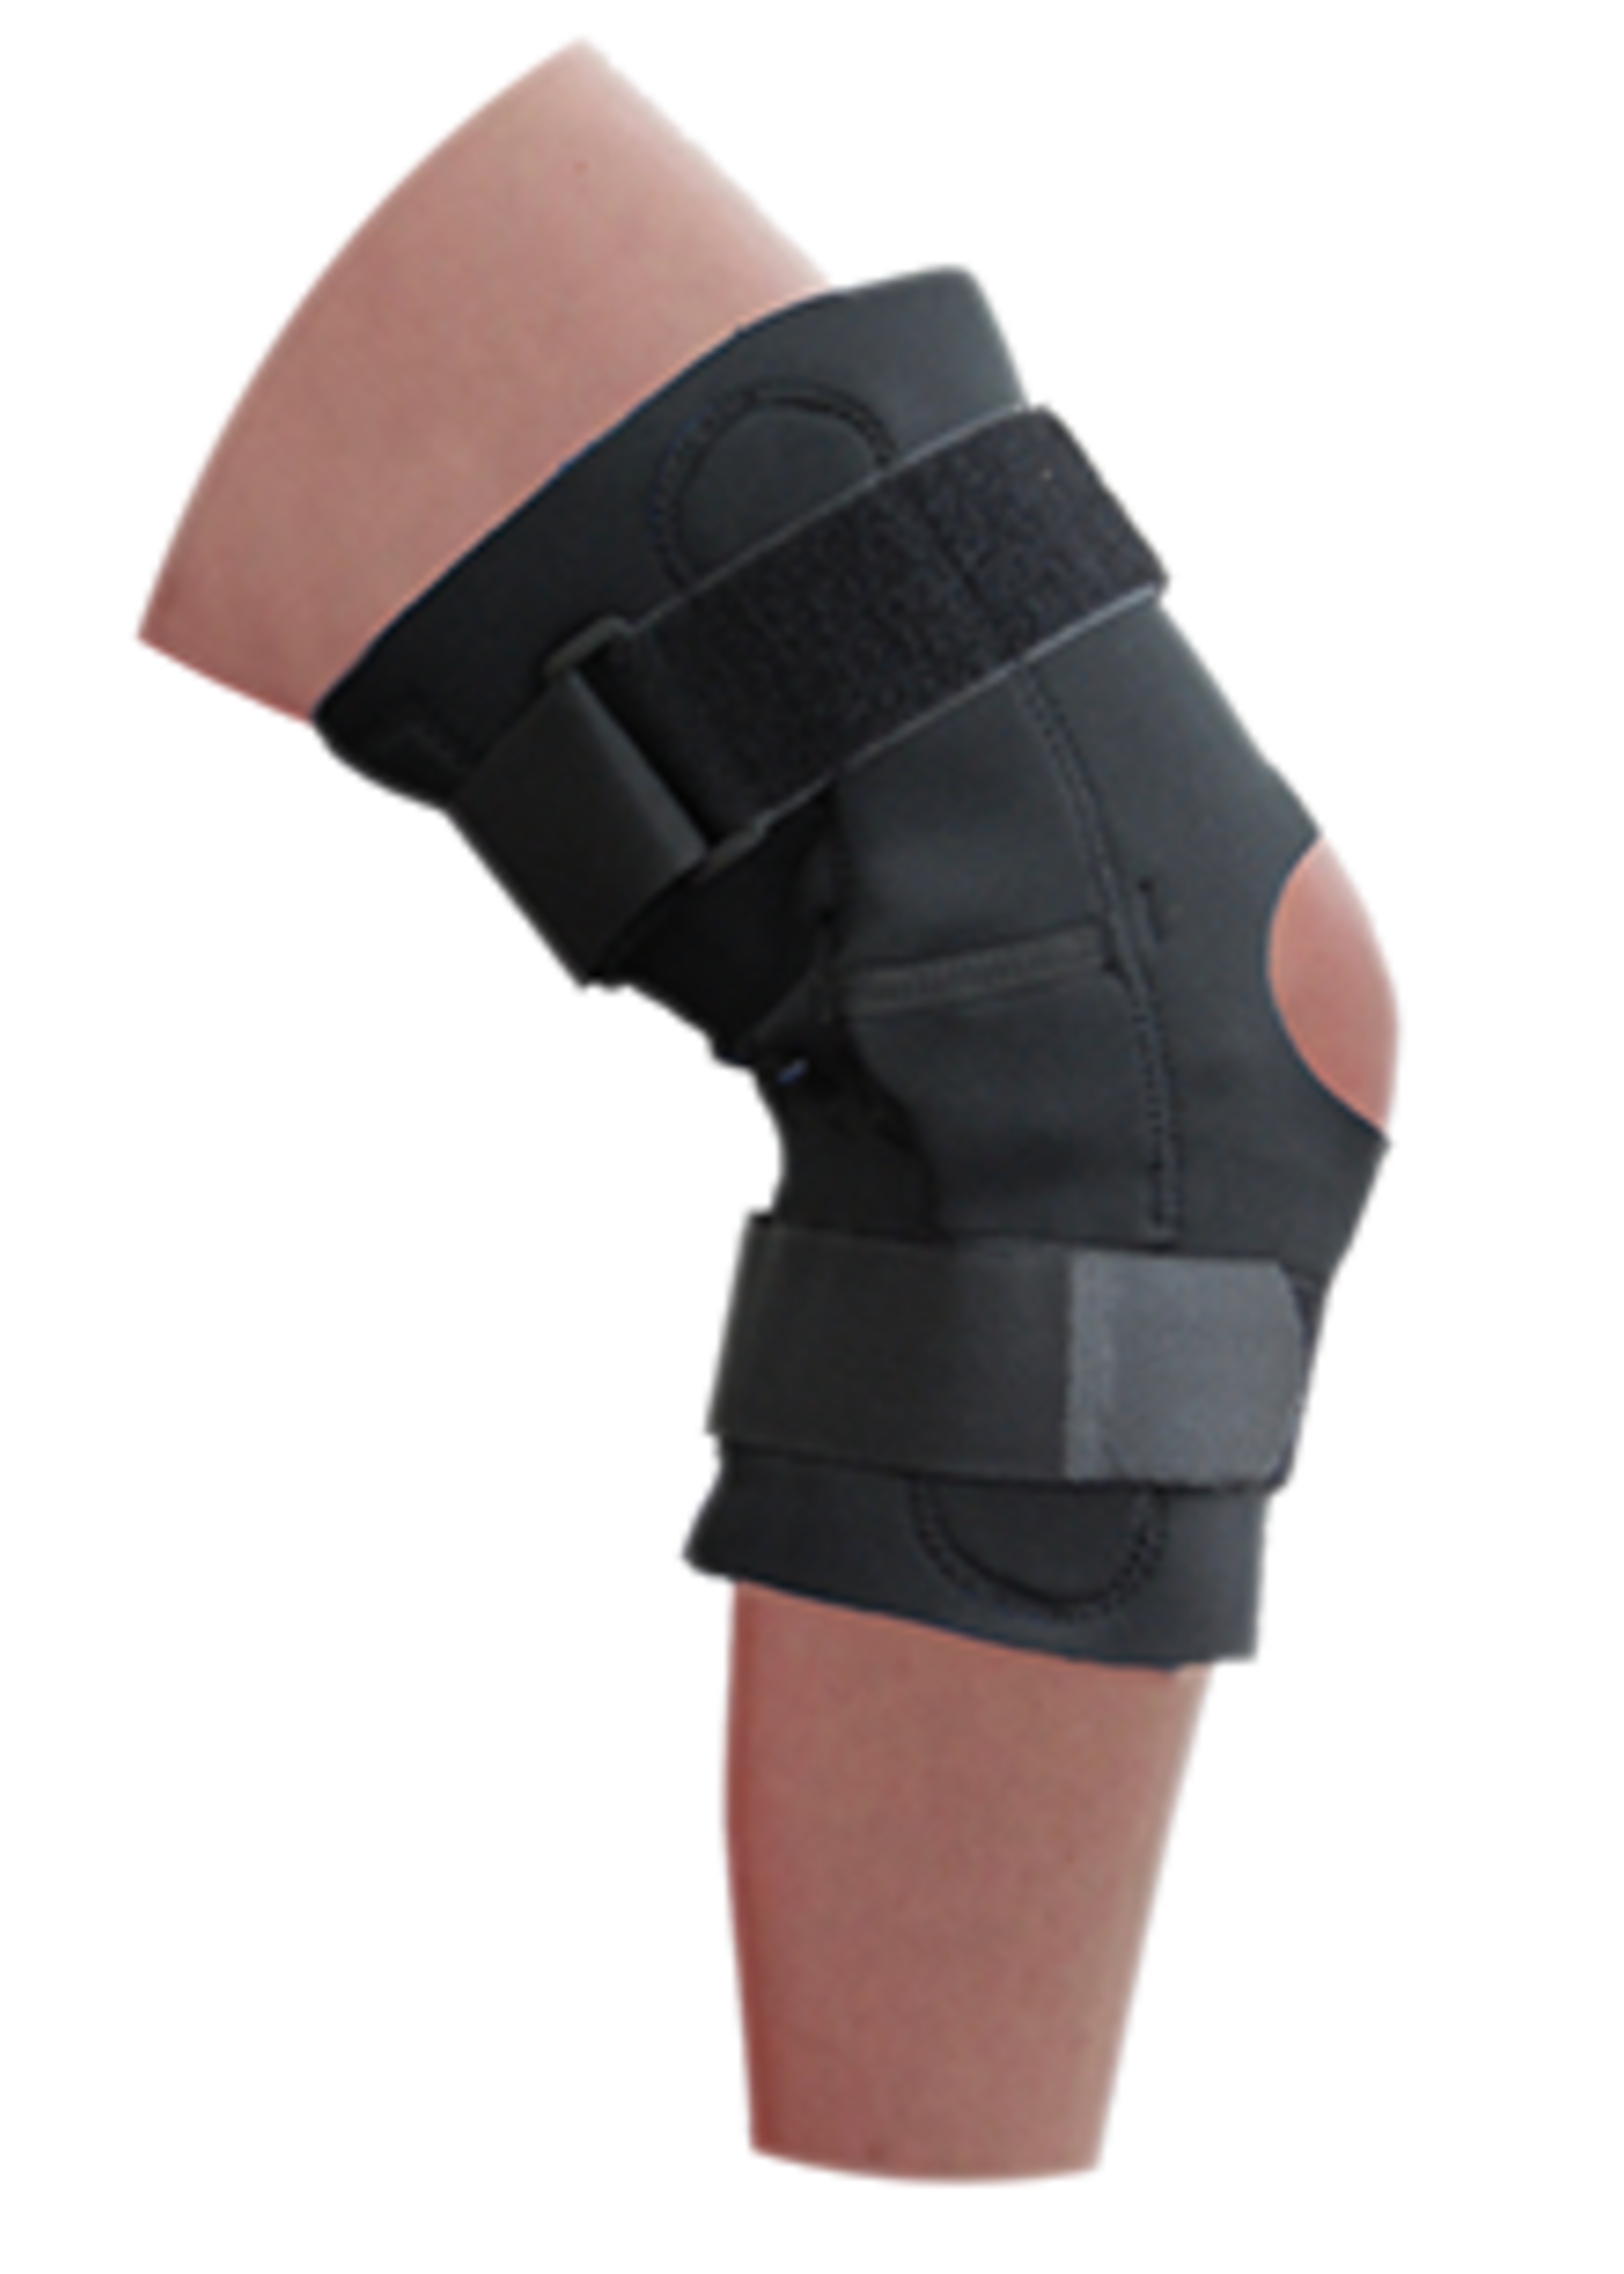 Home Aide Knee Support Brace (Small) - NDC# 91237-0001-61